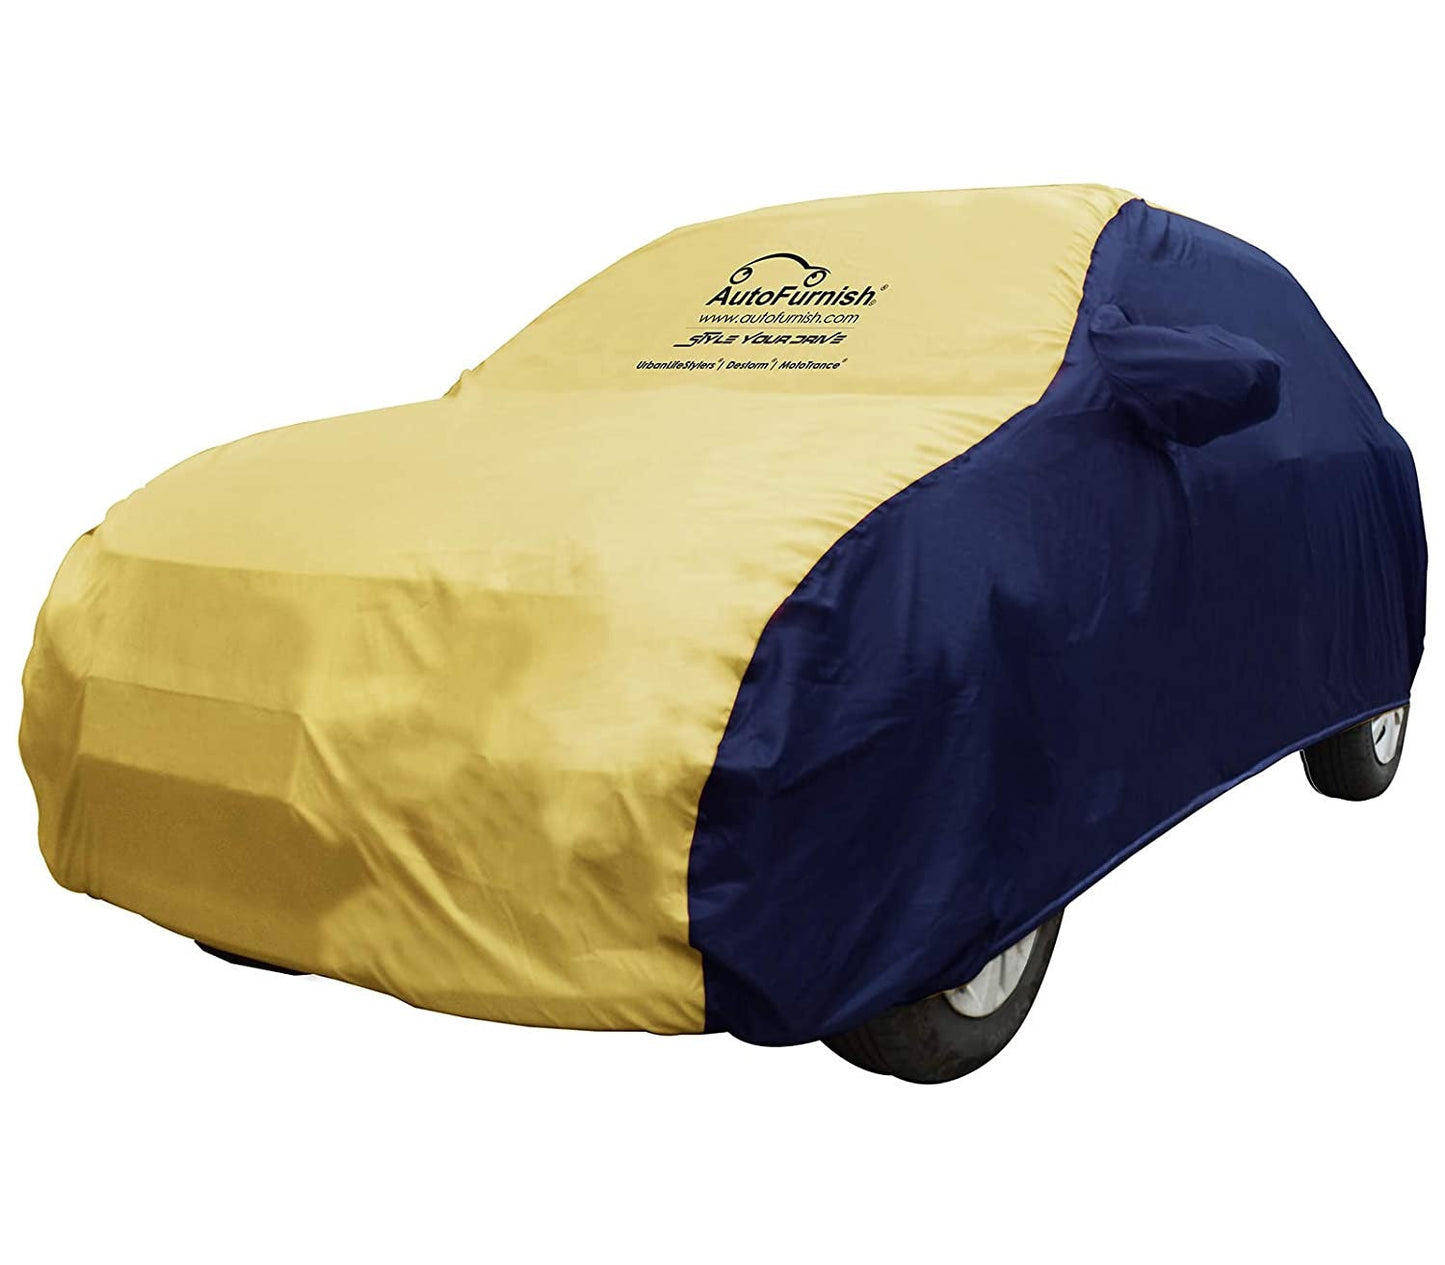 Toyota Vellfire (2020) Car Body Cover, Triple Stitched, Heat & Water Resistant with Side Mirror Pockets (SPORTY Series)